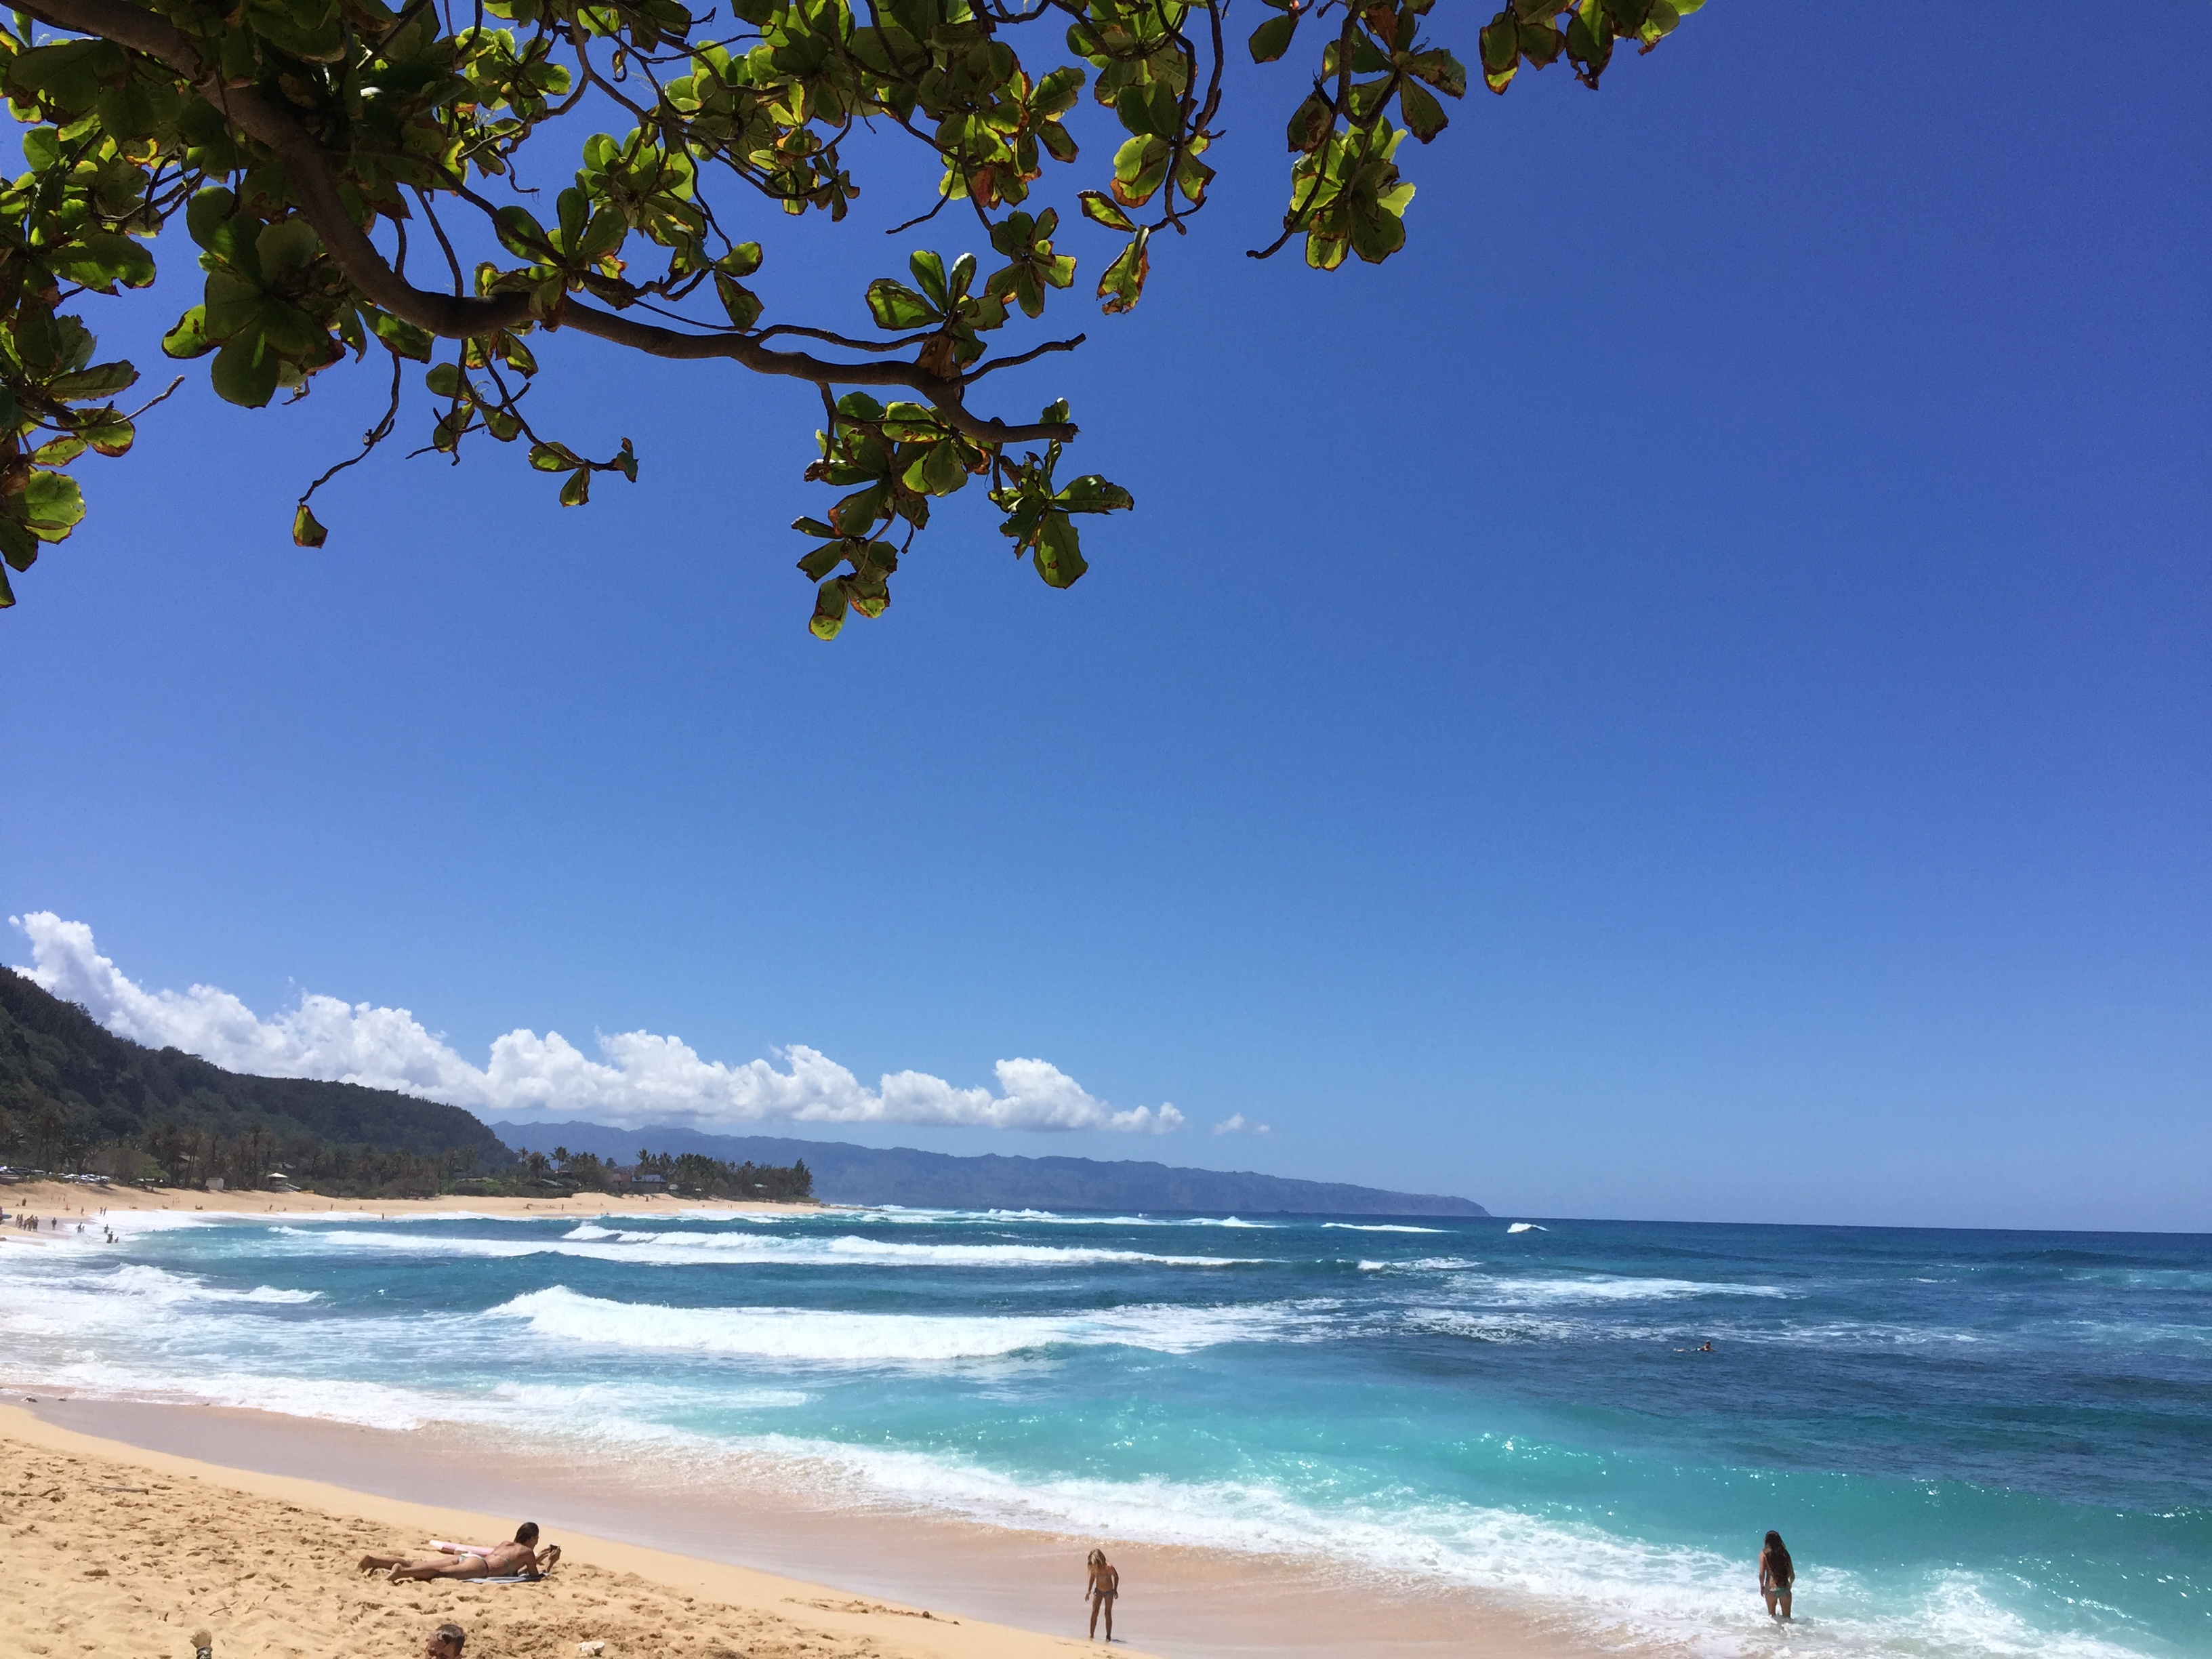 New Foodie Finds on the North Shore of Oahu